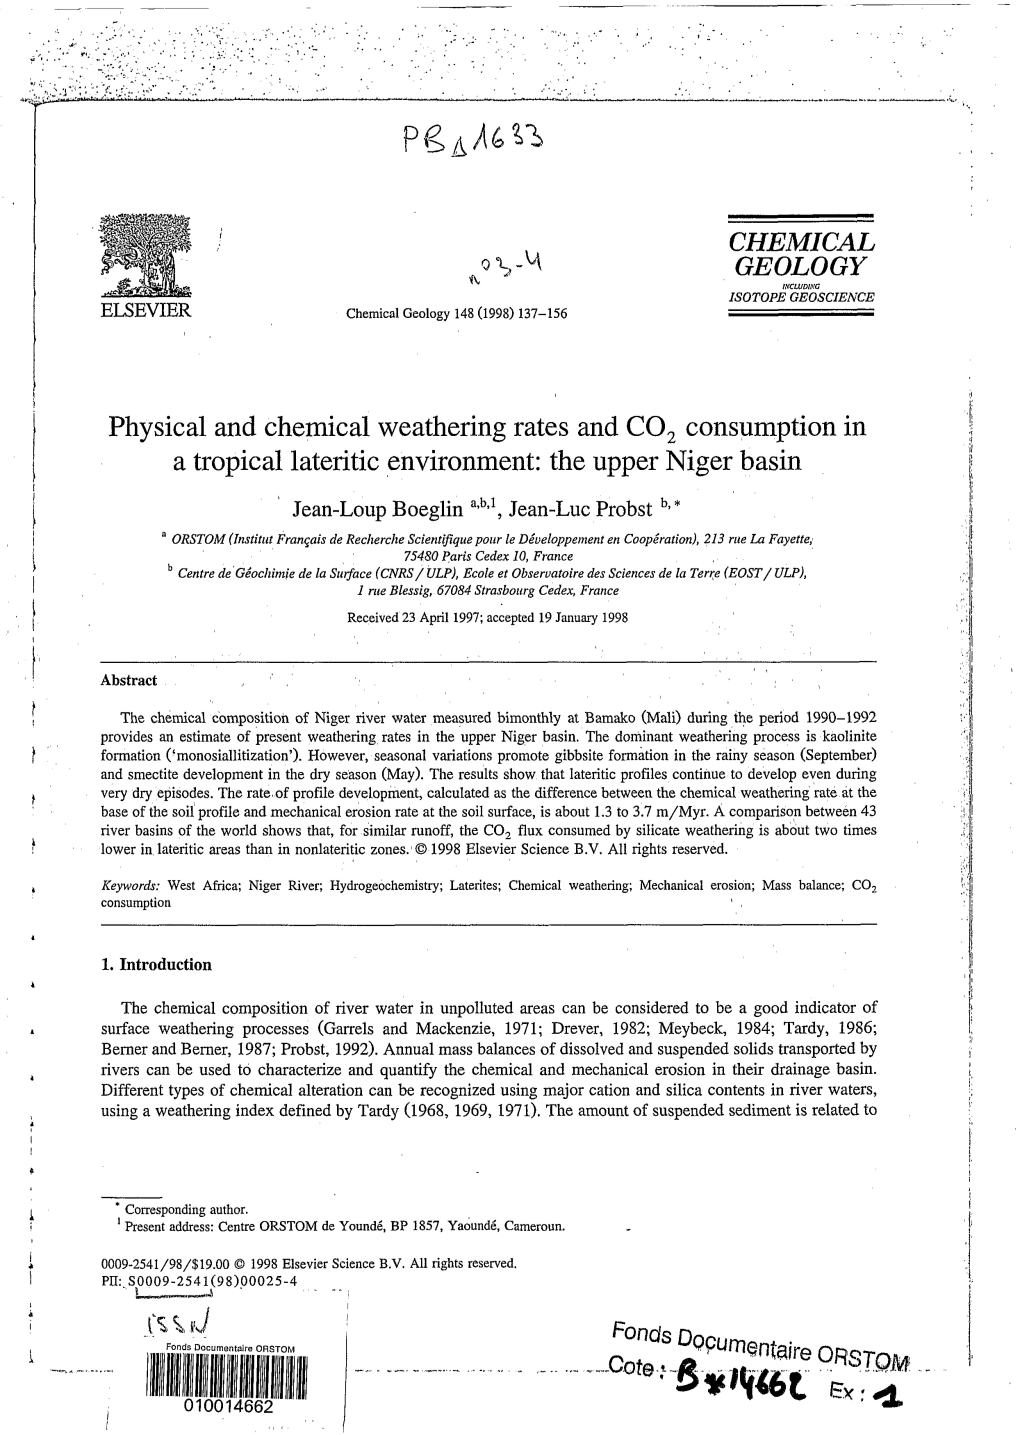 Physical and Chemical Weathering Rates and CO2 Consumption in A